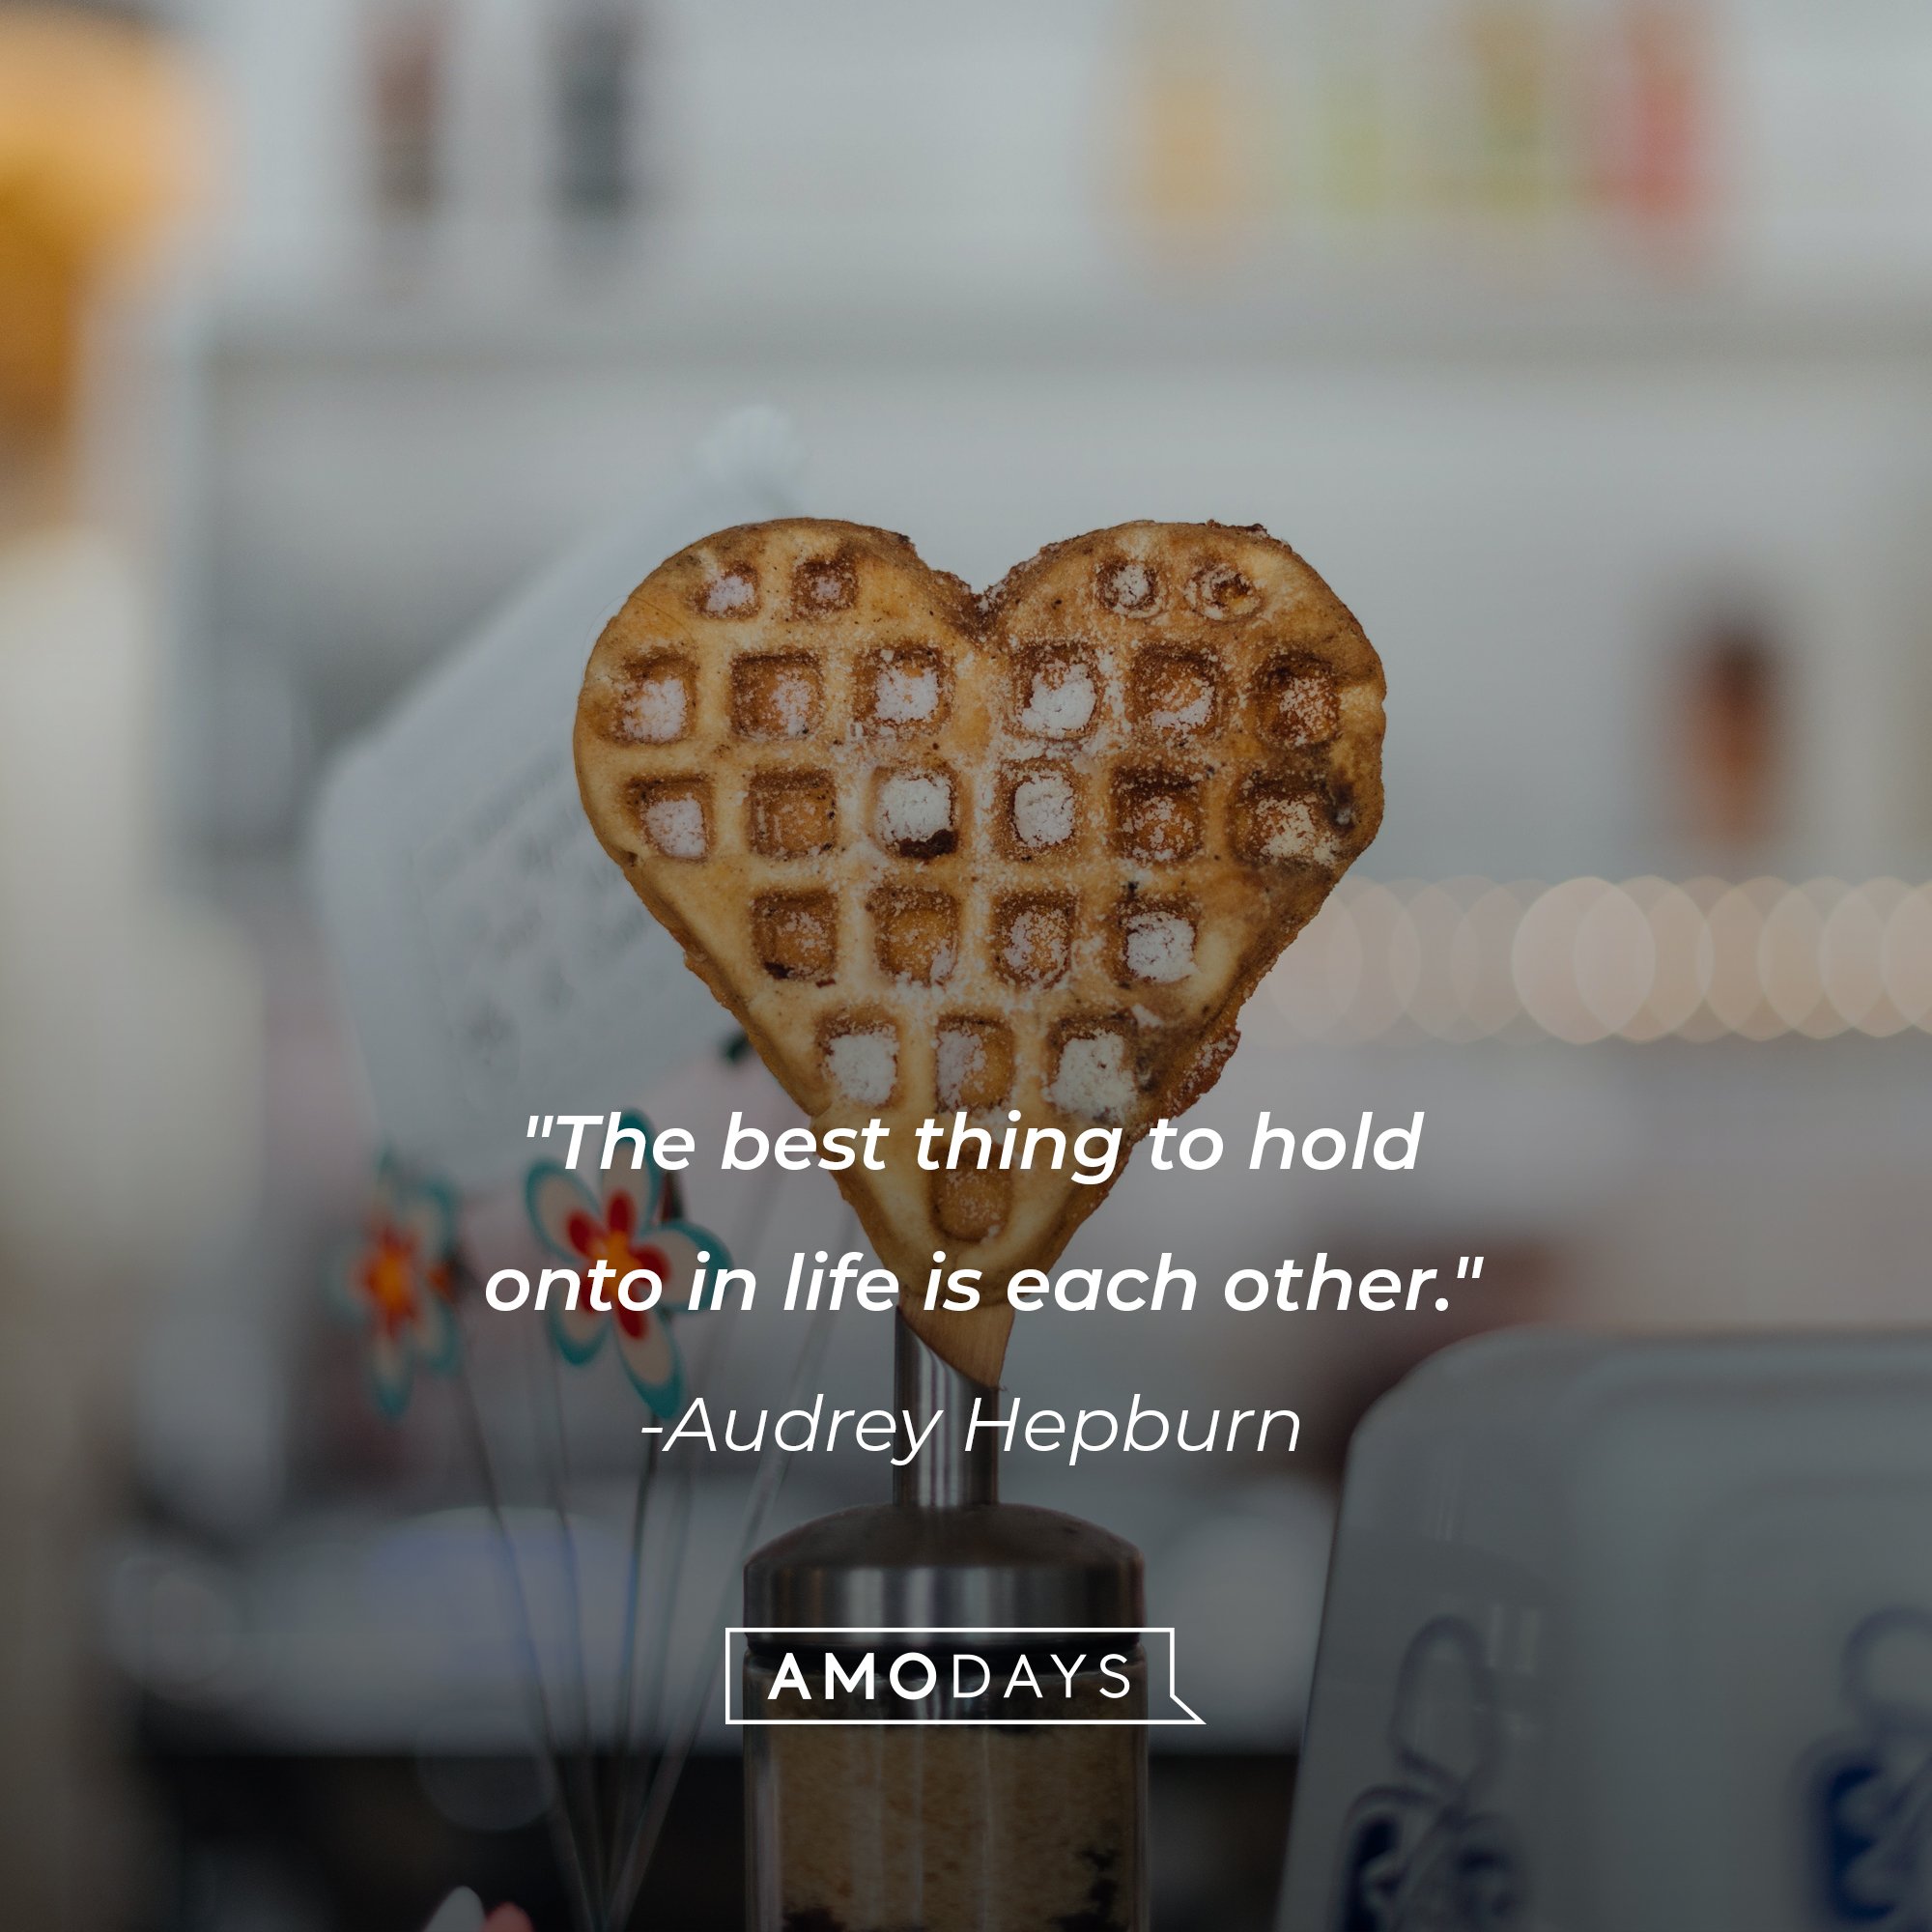 Audrey Hepburn’s quote: "The best thing to hold onto in life is each other." | Image: AmoDays